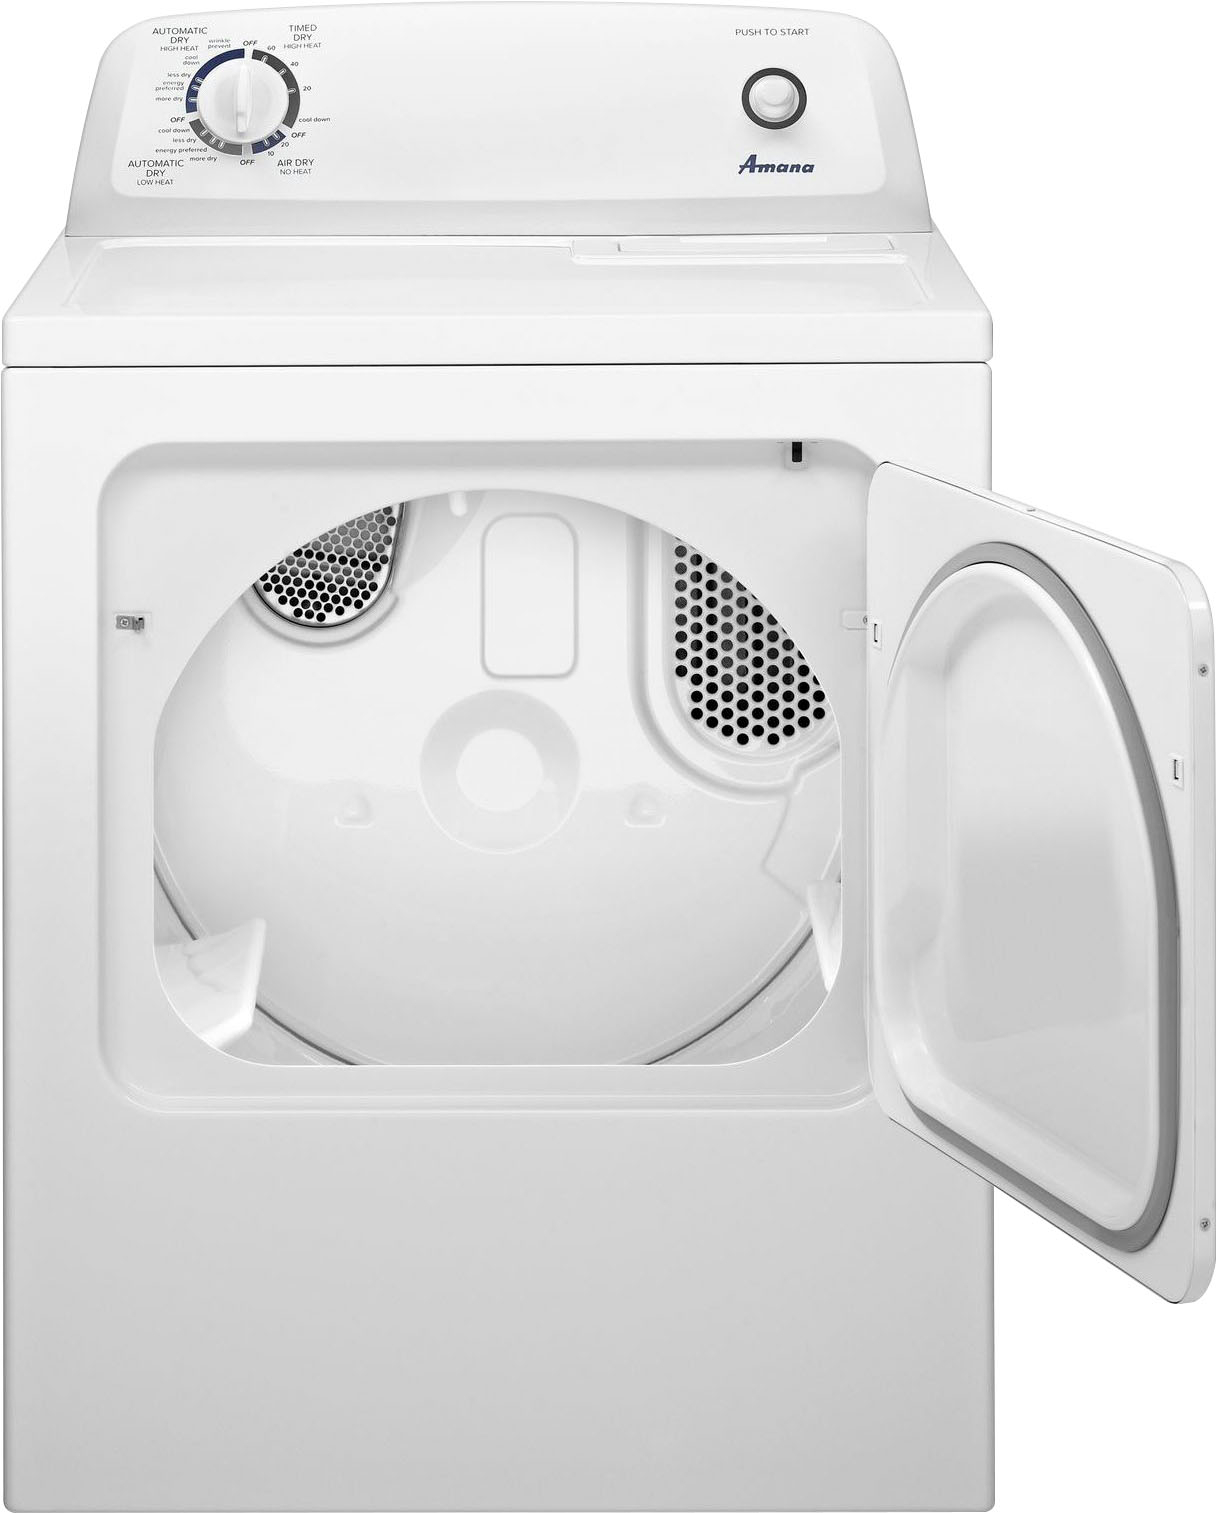 Angle View: Samsung - 7.5 Cu. Ft. Stackable Electric Dryer with Sensor Dry - Platinum